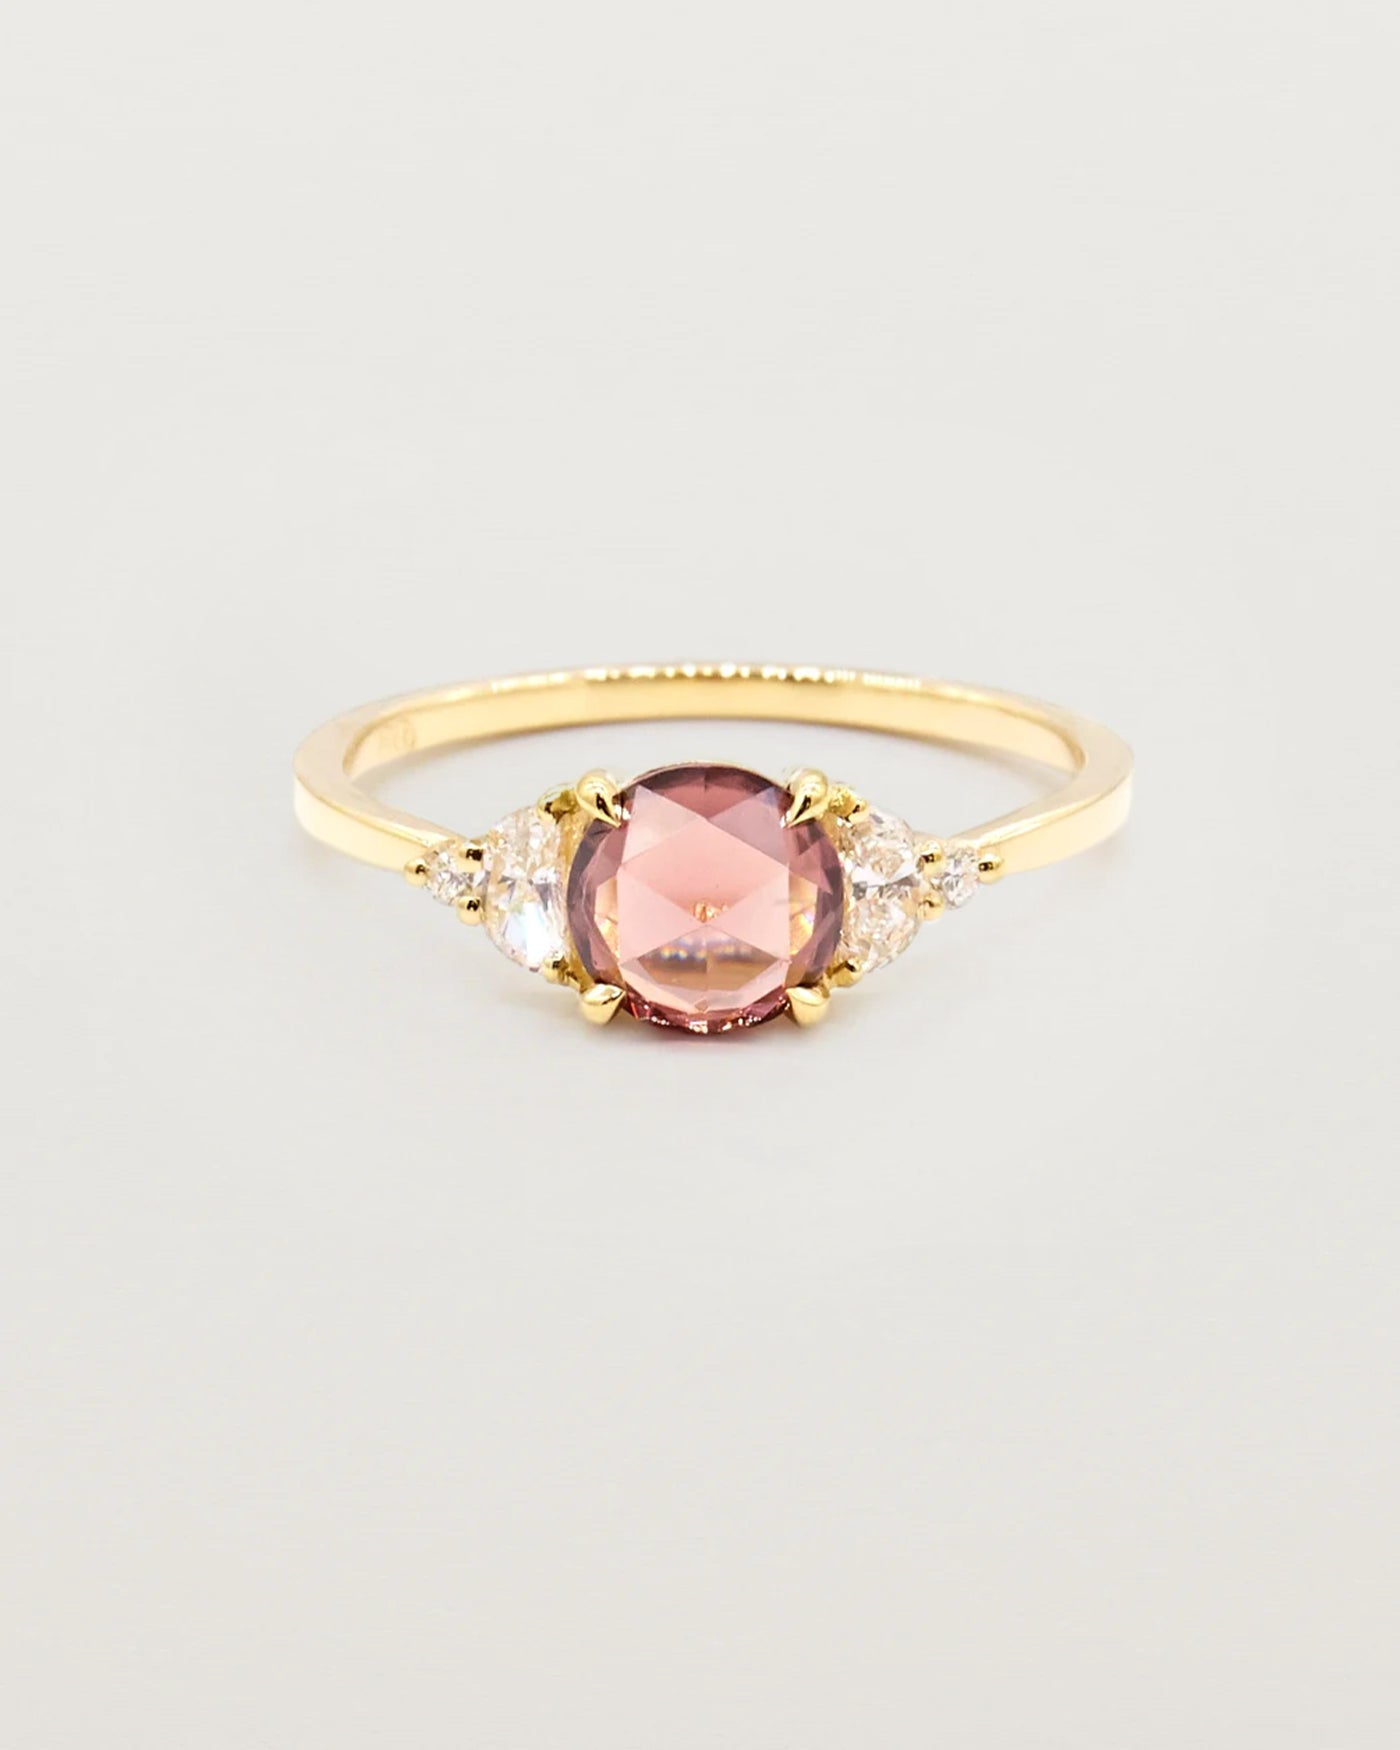 Peach Zircon engagement ring in yellow gold